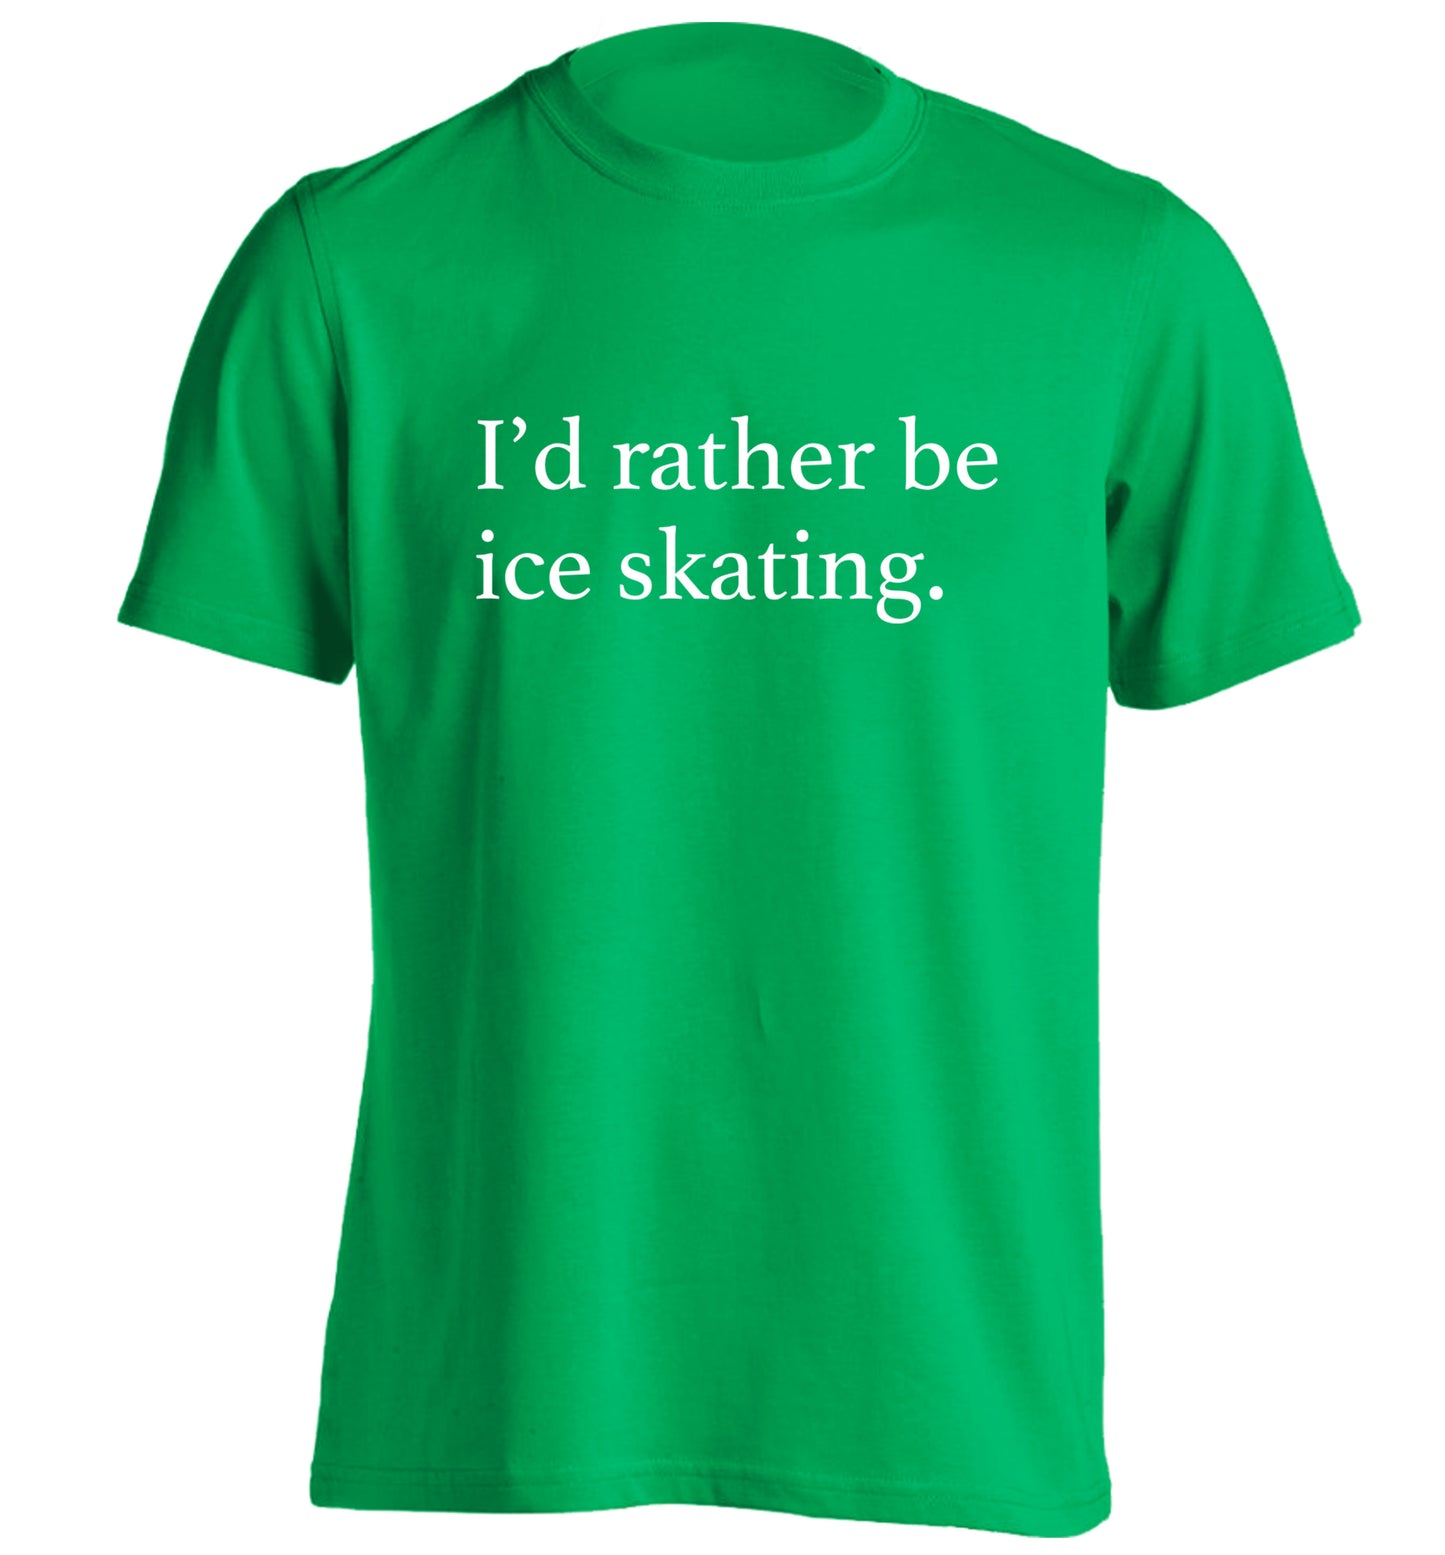 I'd rather be ice skating adults unisexgreen Tshirt 2XL